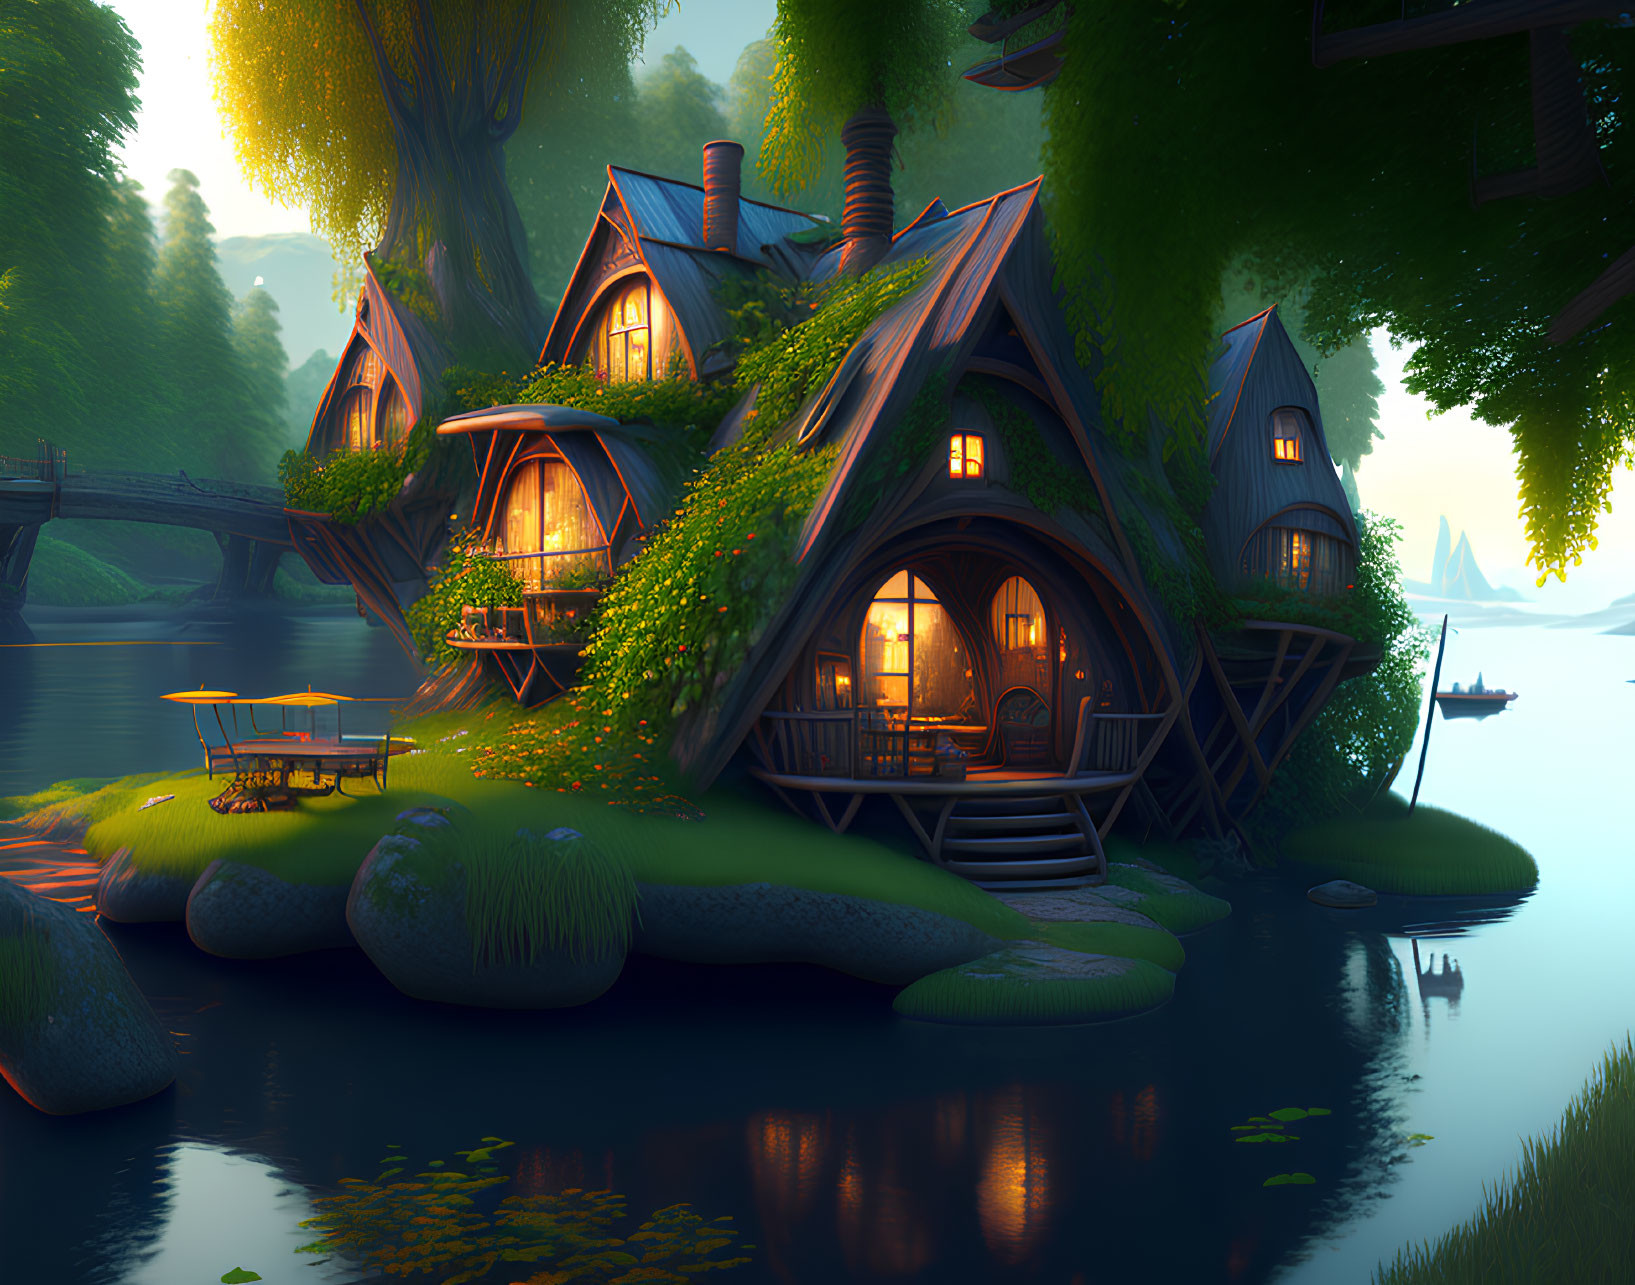 Fantasy riverside cottages in lush greenery at dusk